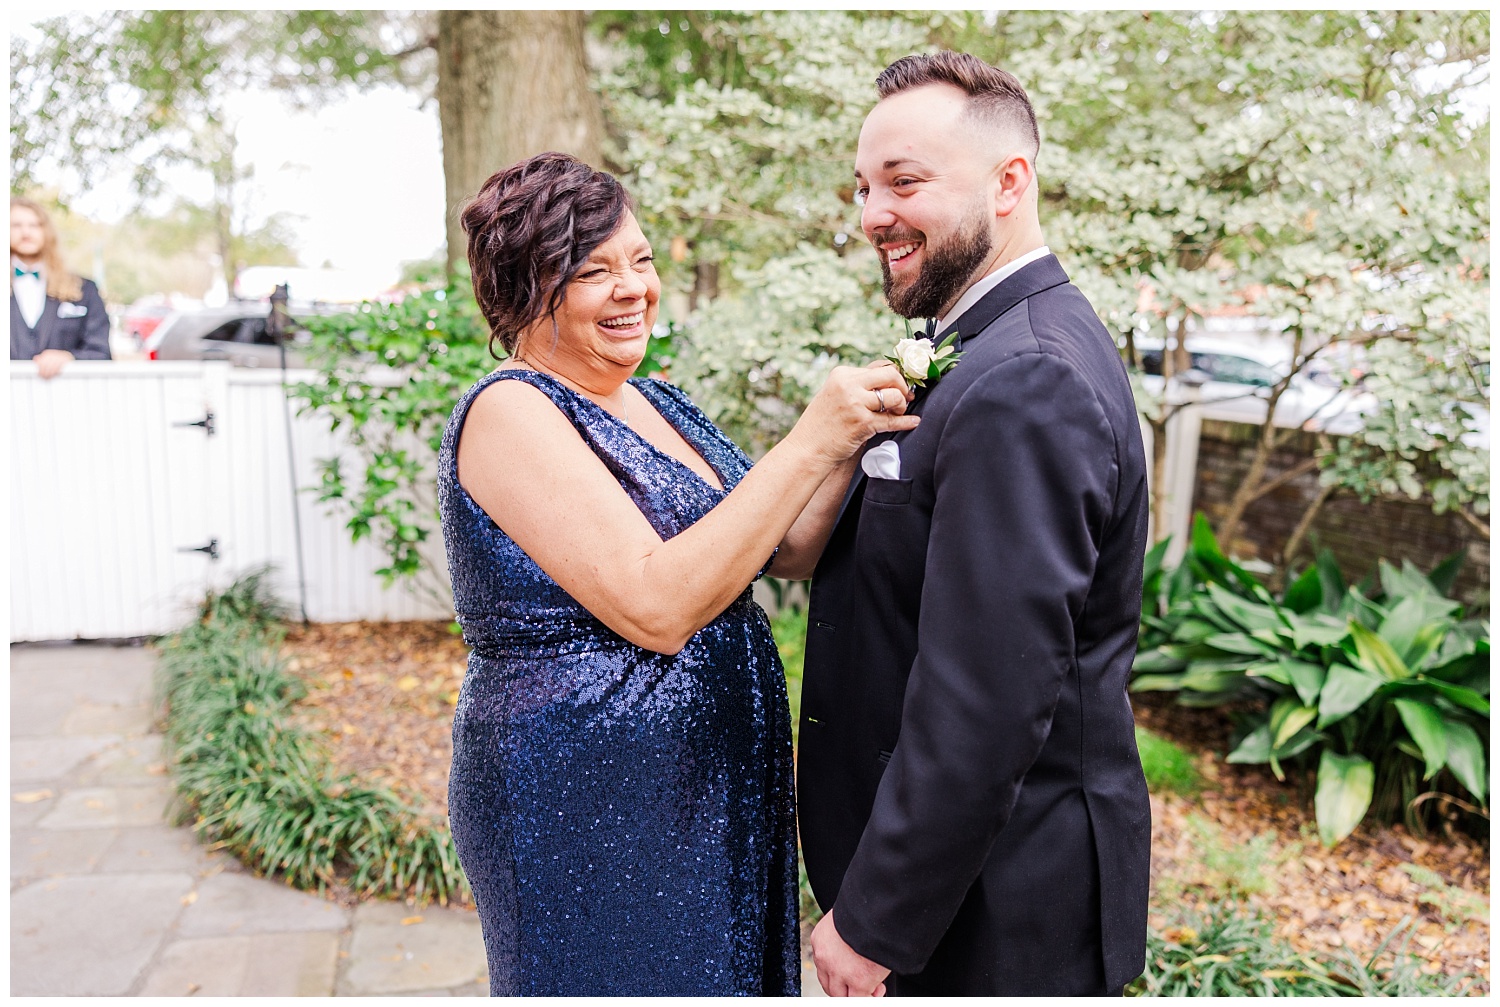 groom's mom pinning on his boutonniere before the wedding 